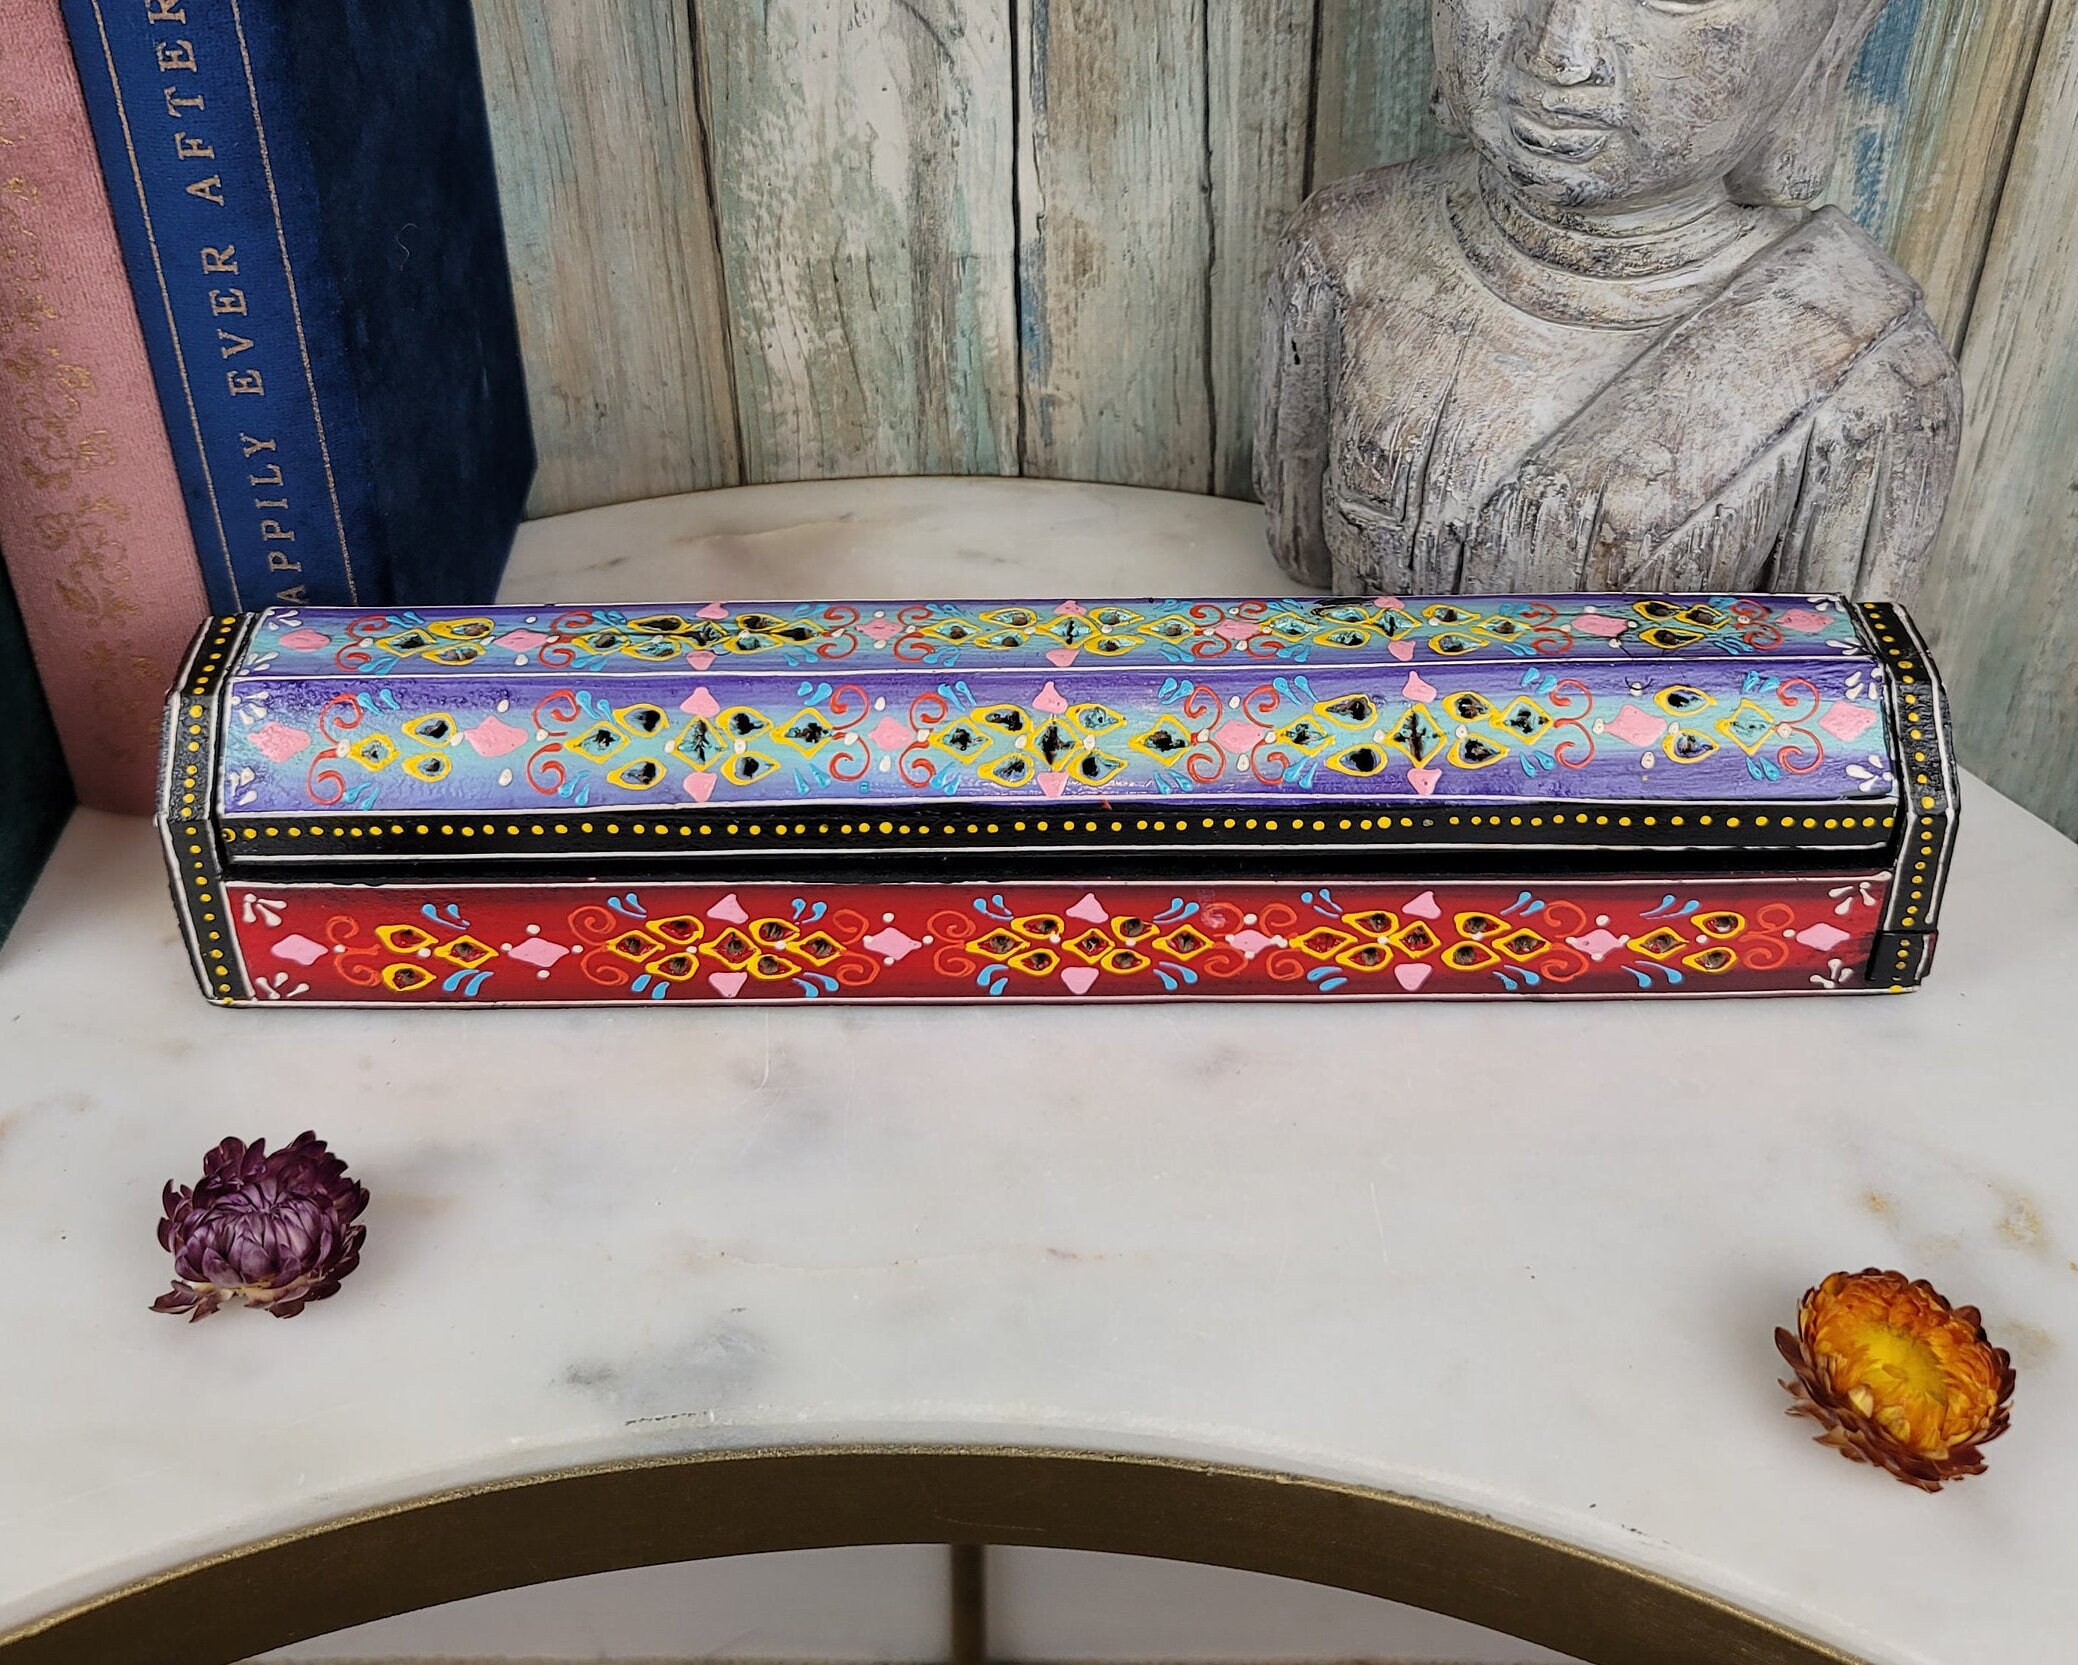 YunZCHENSH Incense Storage Coffin Box Vintage Incense Holder with Fireproof  Cotton Decorative Ash Catcher for Aromatherapy Meditation Yoga